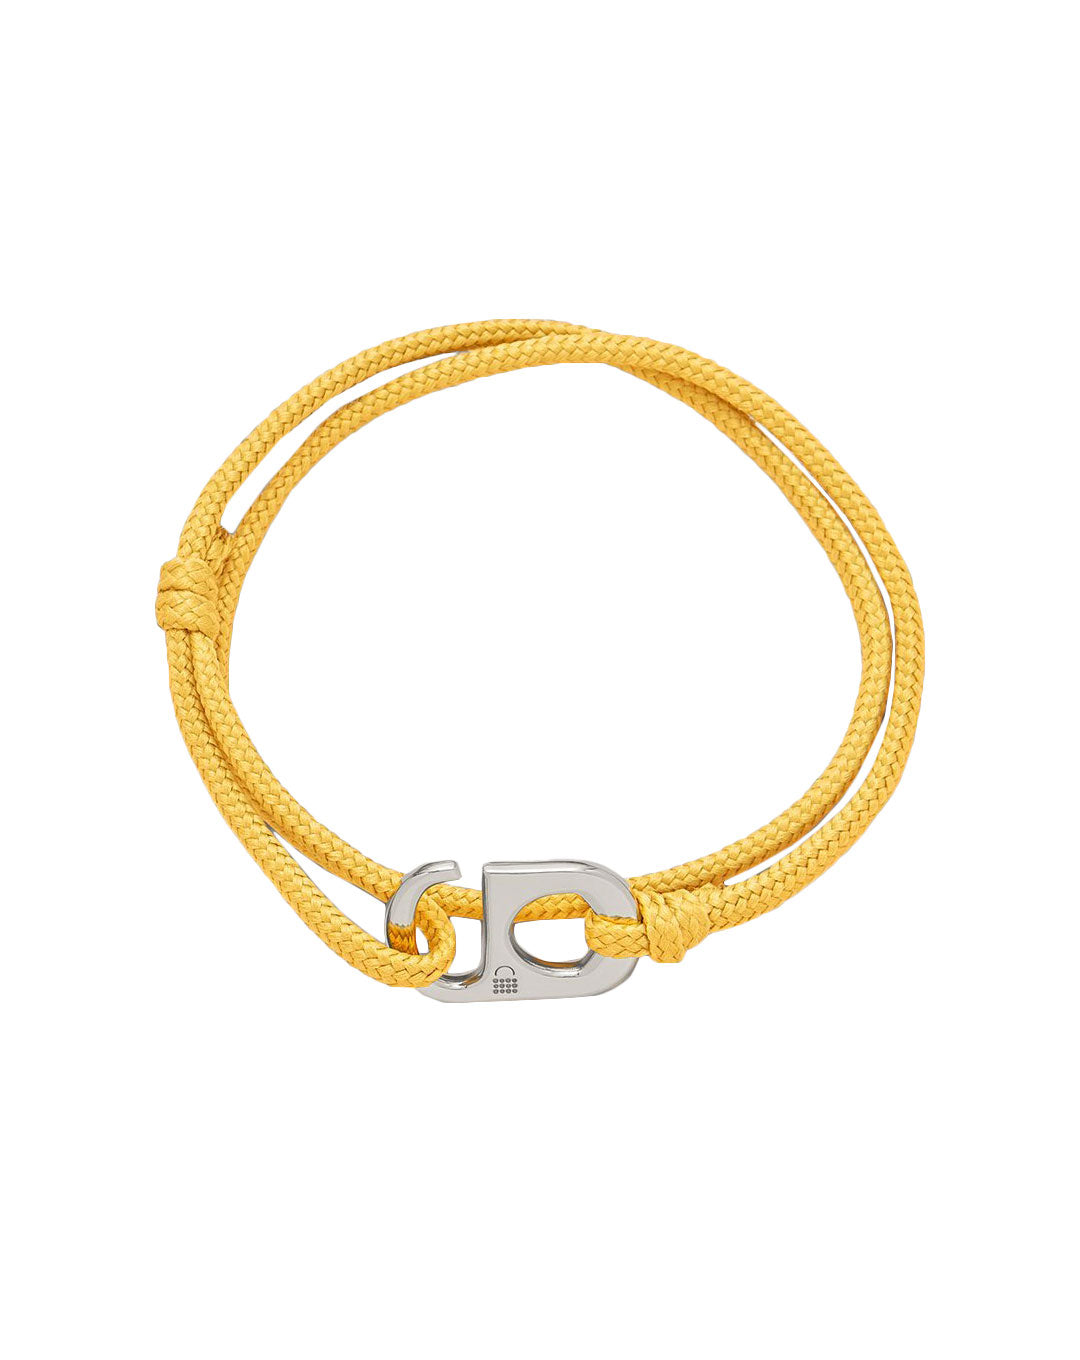 #TOGETHERBAND Edition x Little Sun  - Goal 7: Affordable and Clean Energy